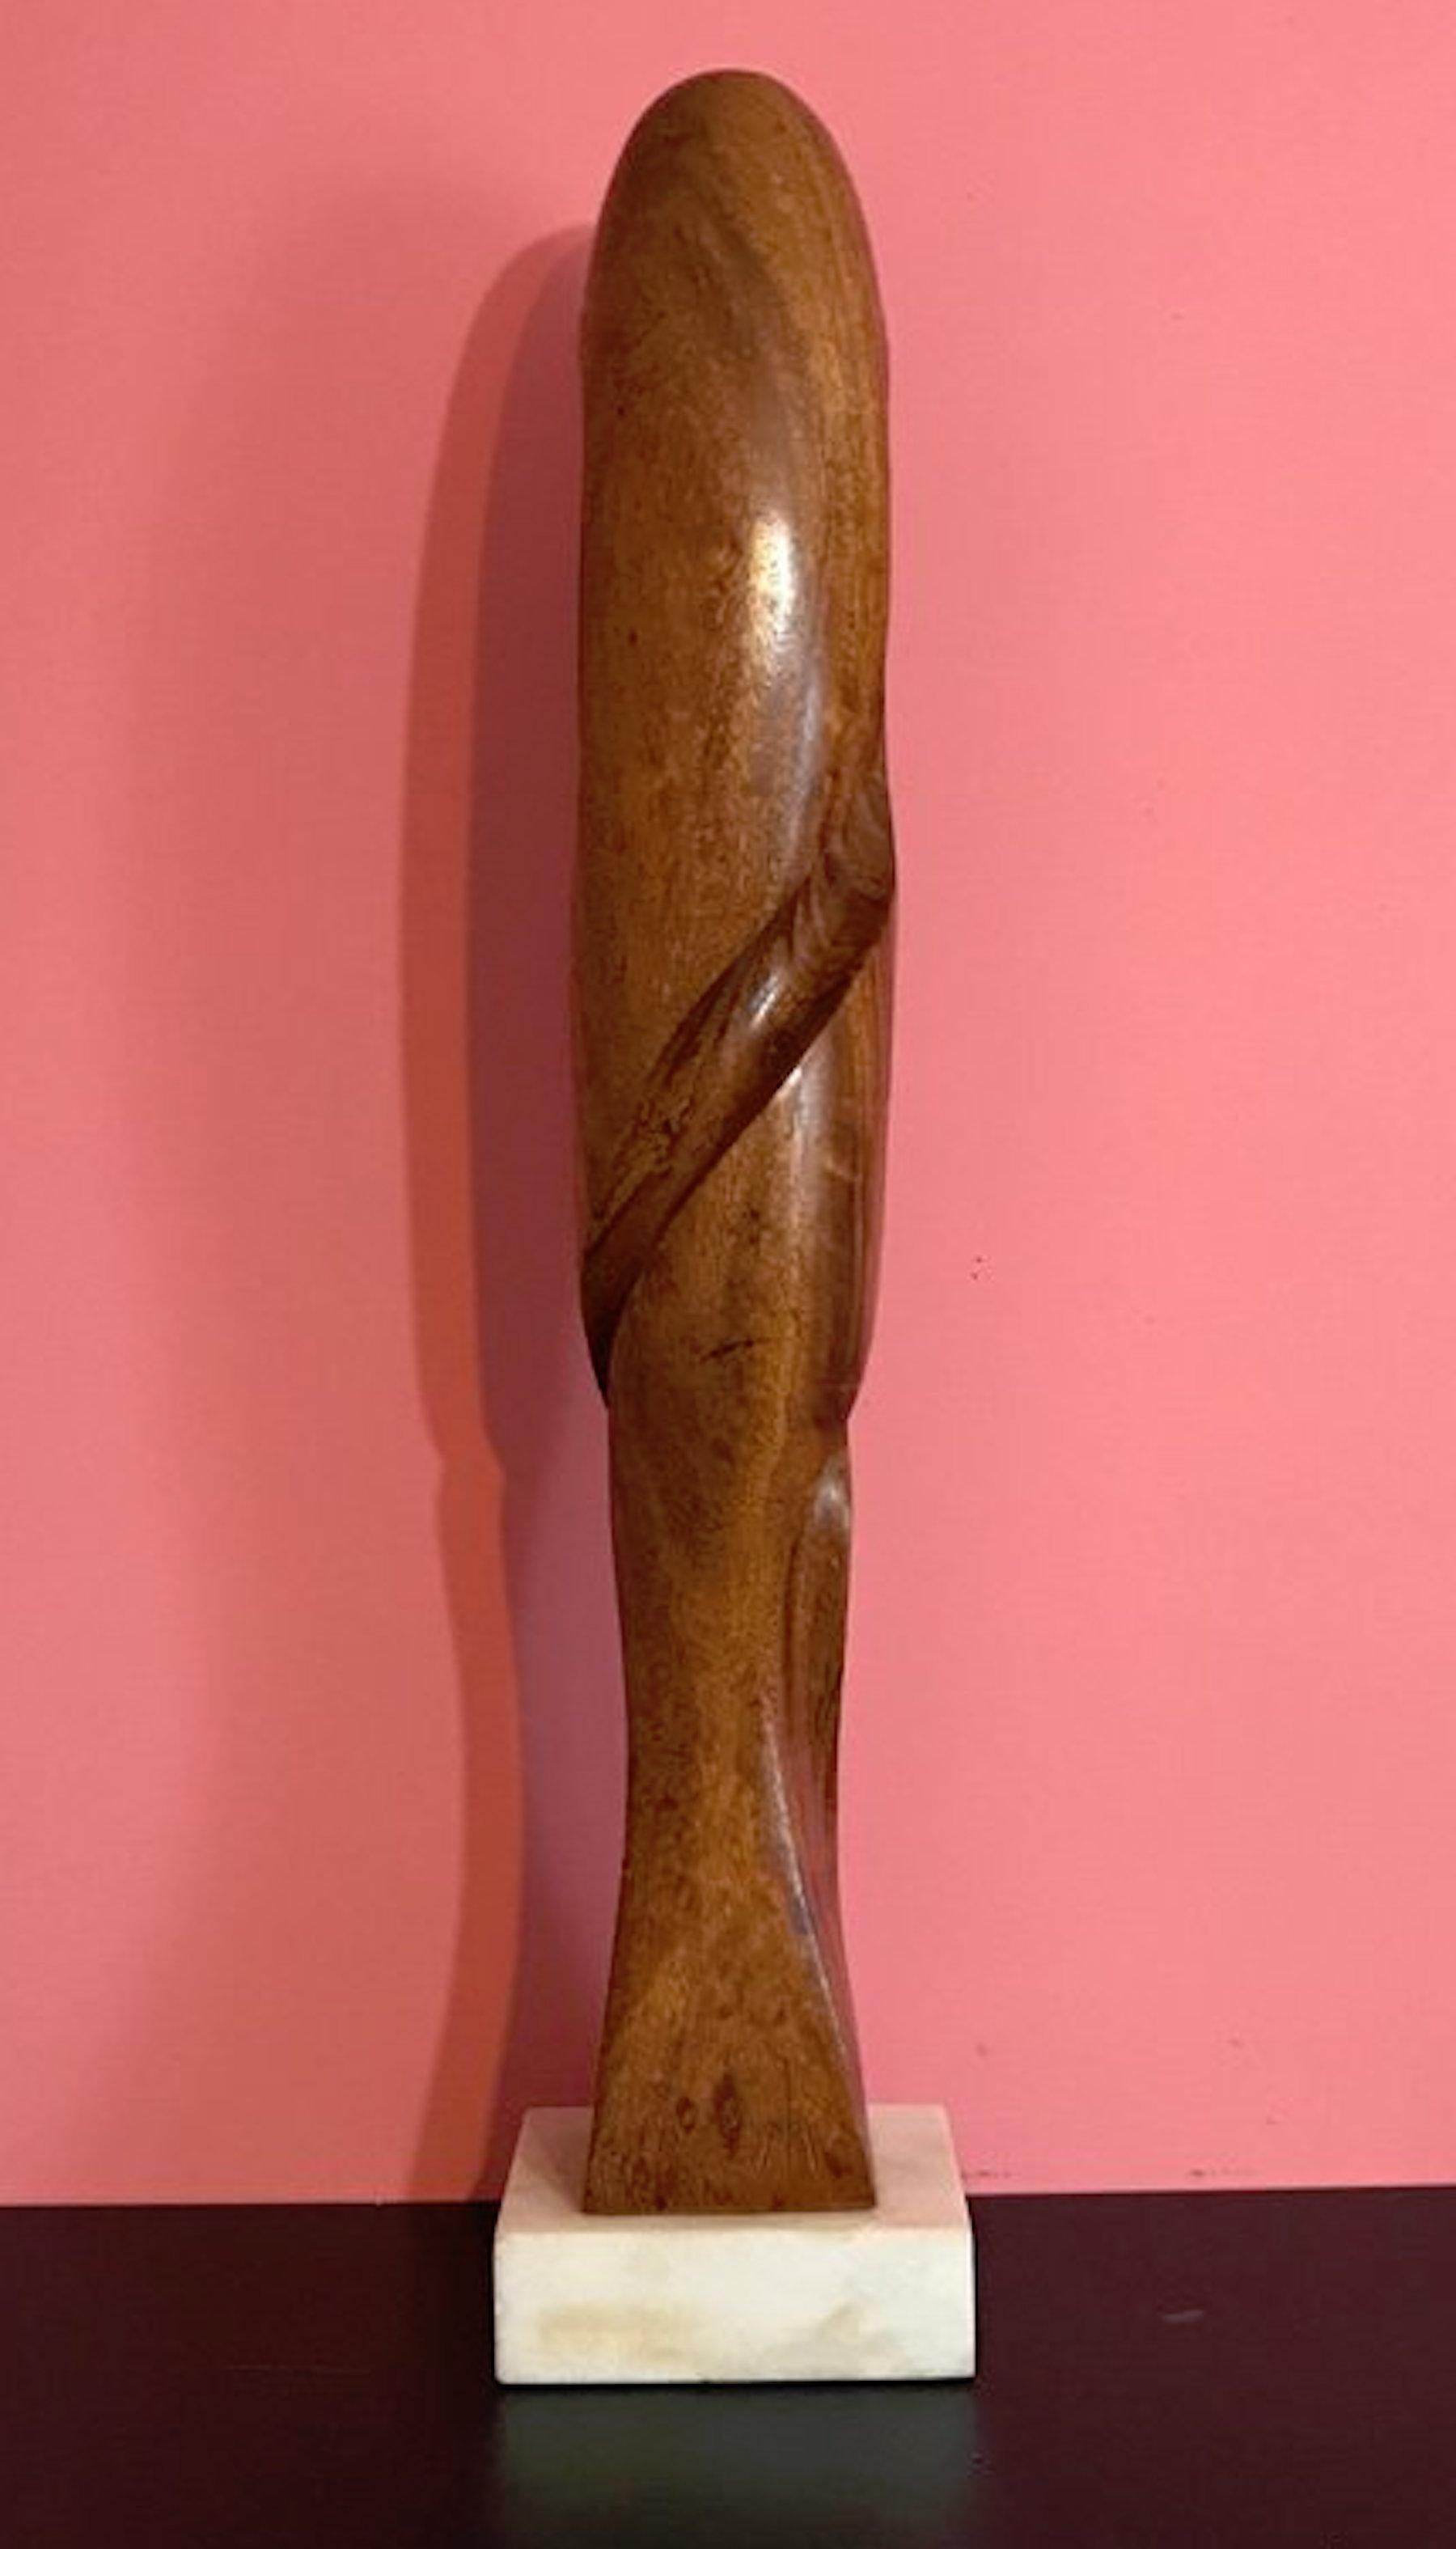 Mahogany Carved Modern Wood Sculpture, Attributed to Henry Moretti